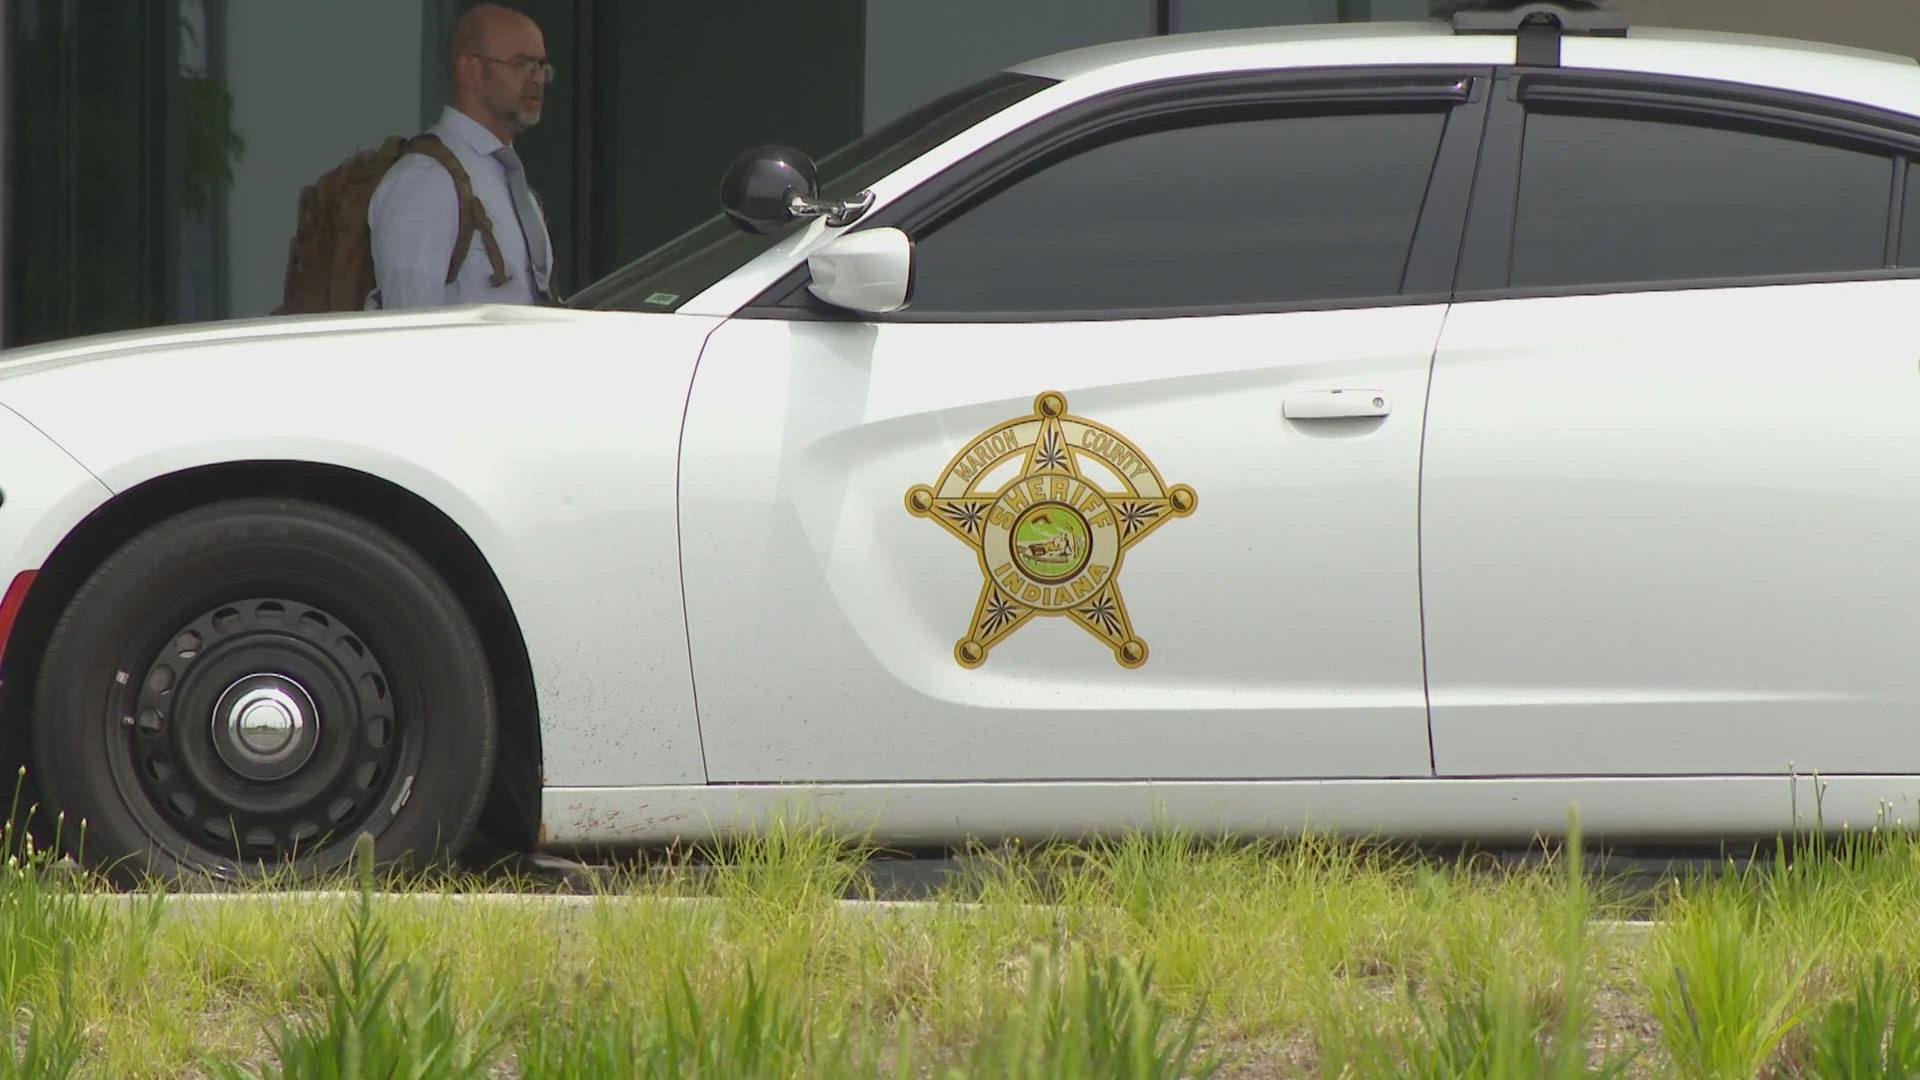 Marion County sheriff's deputies warn they don't have enough staff on the department and it's becoming a serious public safety issue.